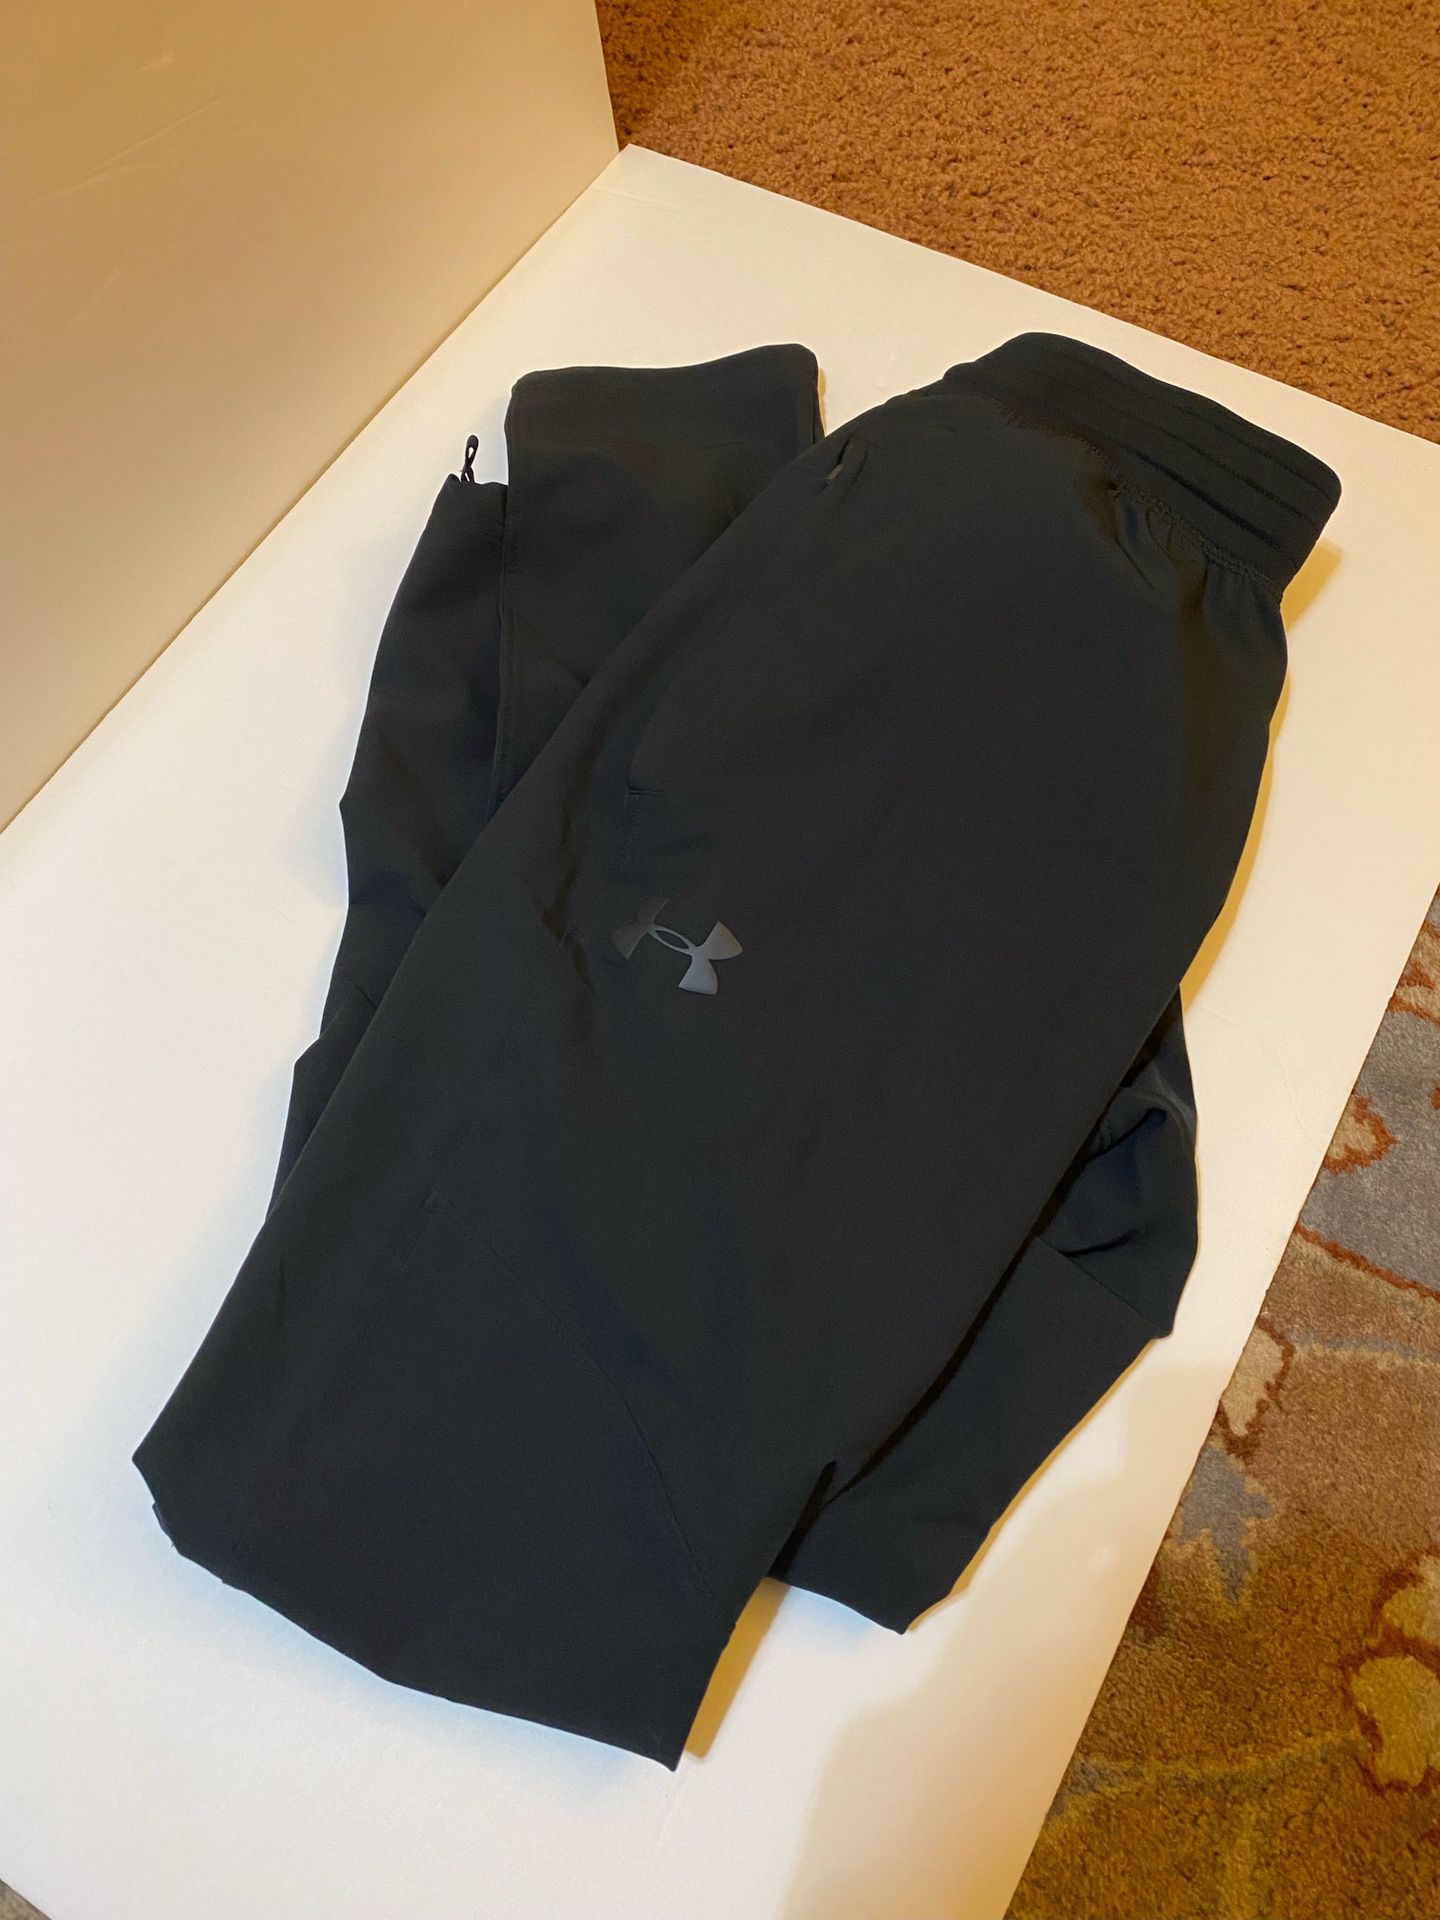 Never Wor N Small Under Armour Fitted Coupe Joggers - Black